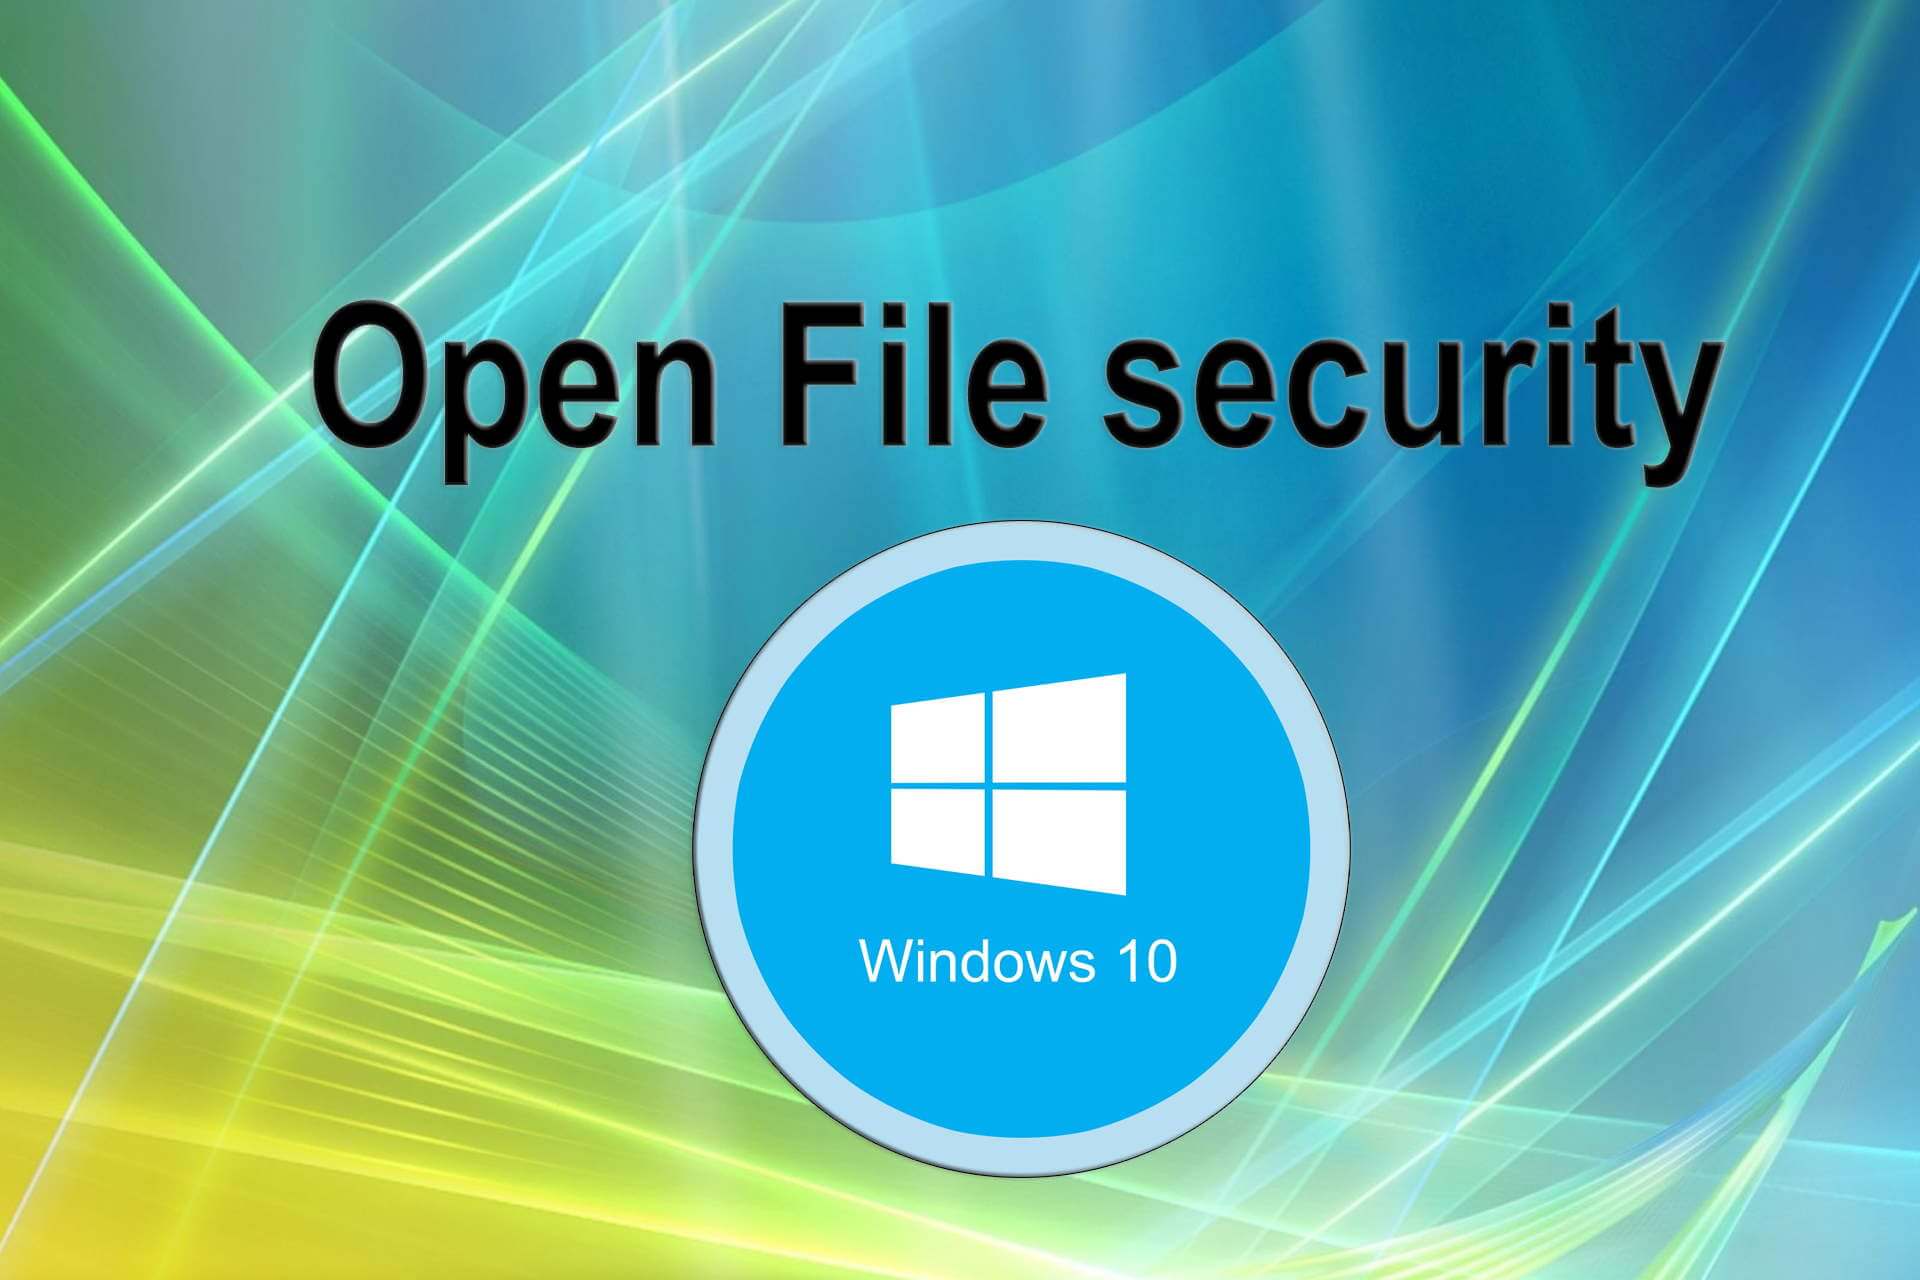 Disable Open File security warning on Windows 10